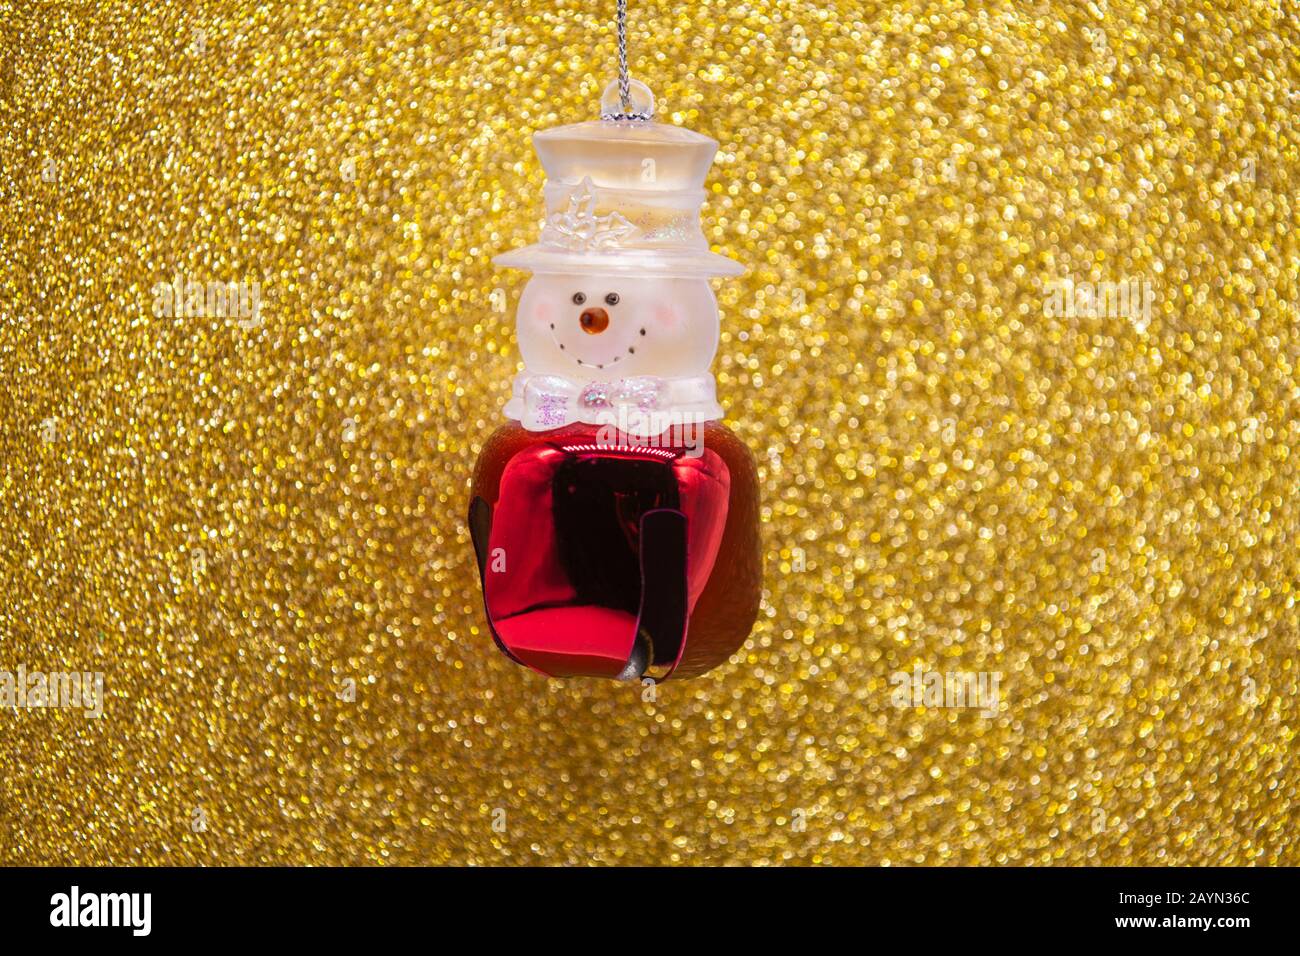 Christmas Snowman bell with glittery golden back ground. Stock Photo